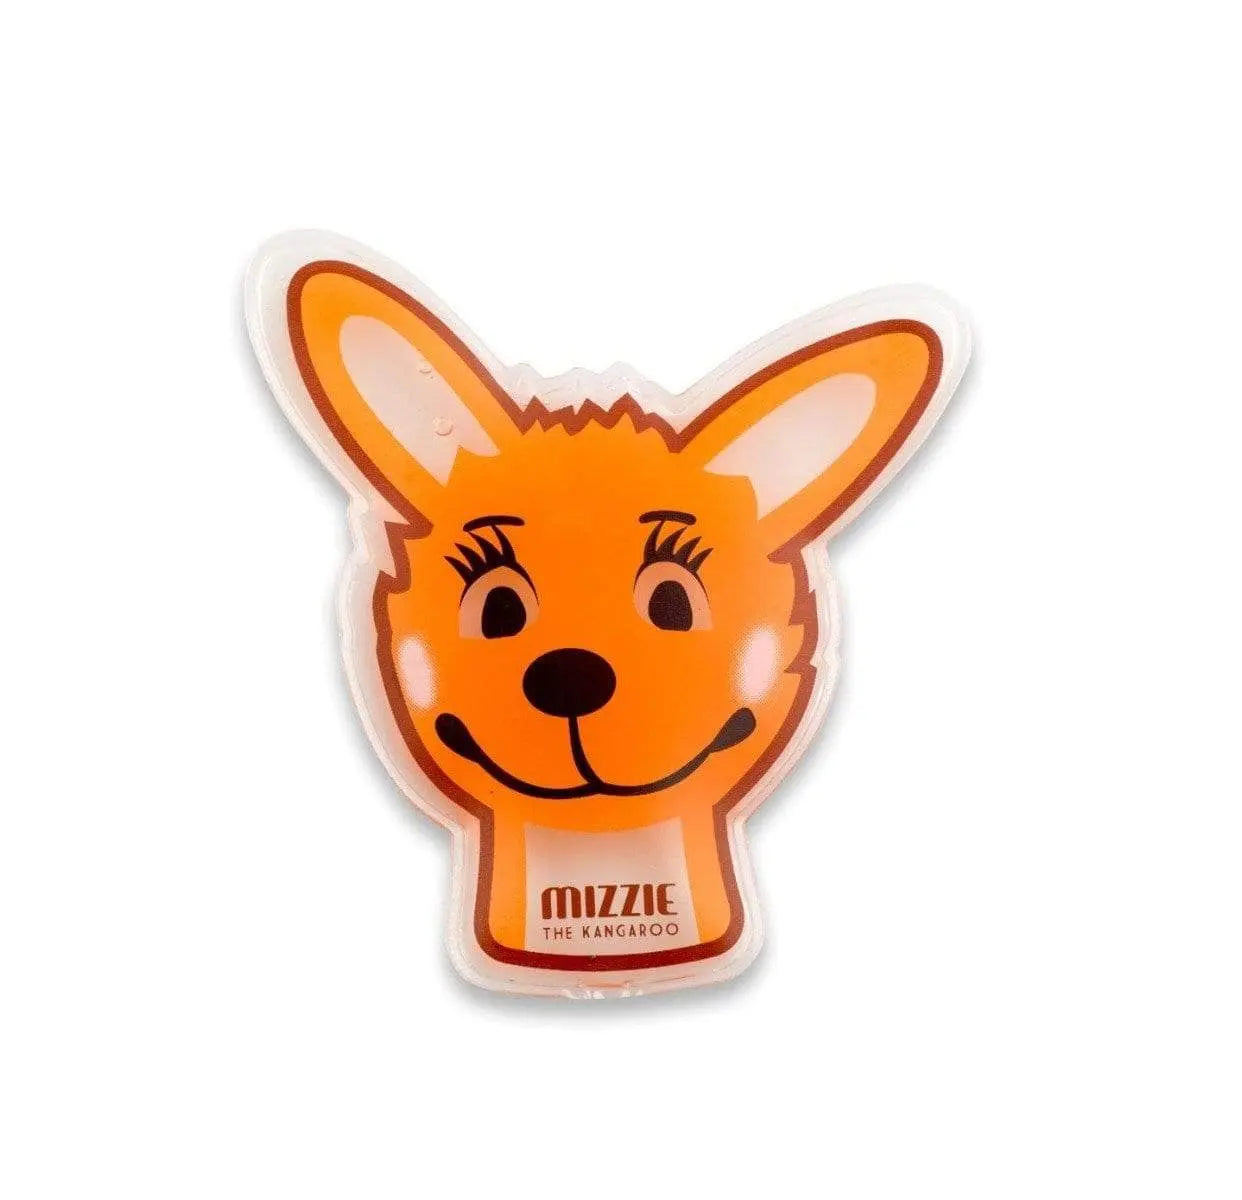 Hot and cold pack Mizzie Freezzie - hot and cold packs for little one's bumps, bruises and scrapes Mizzie the Kangaroo 6.00